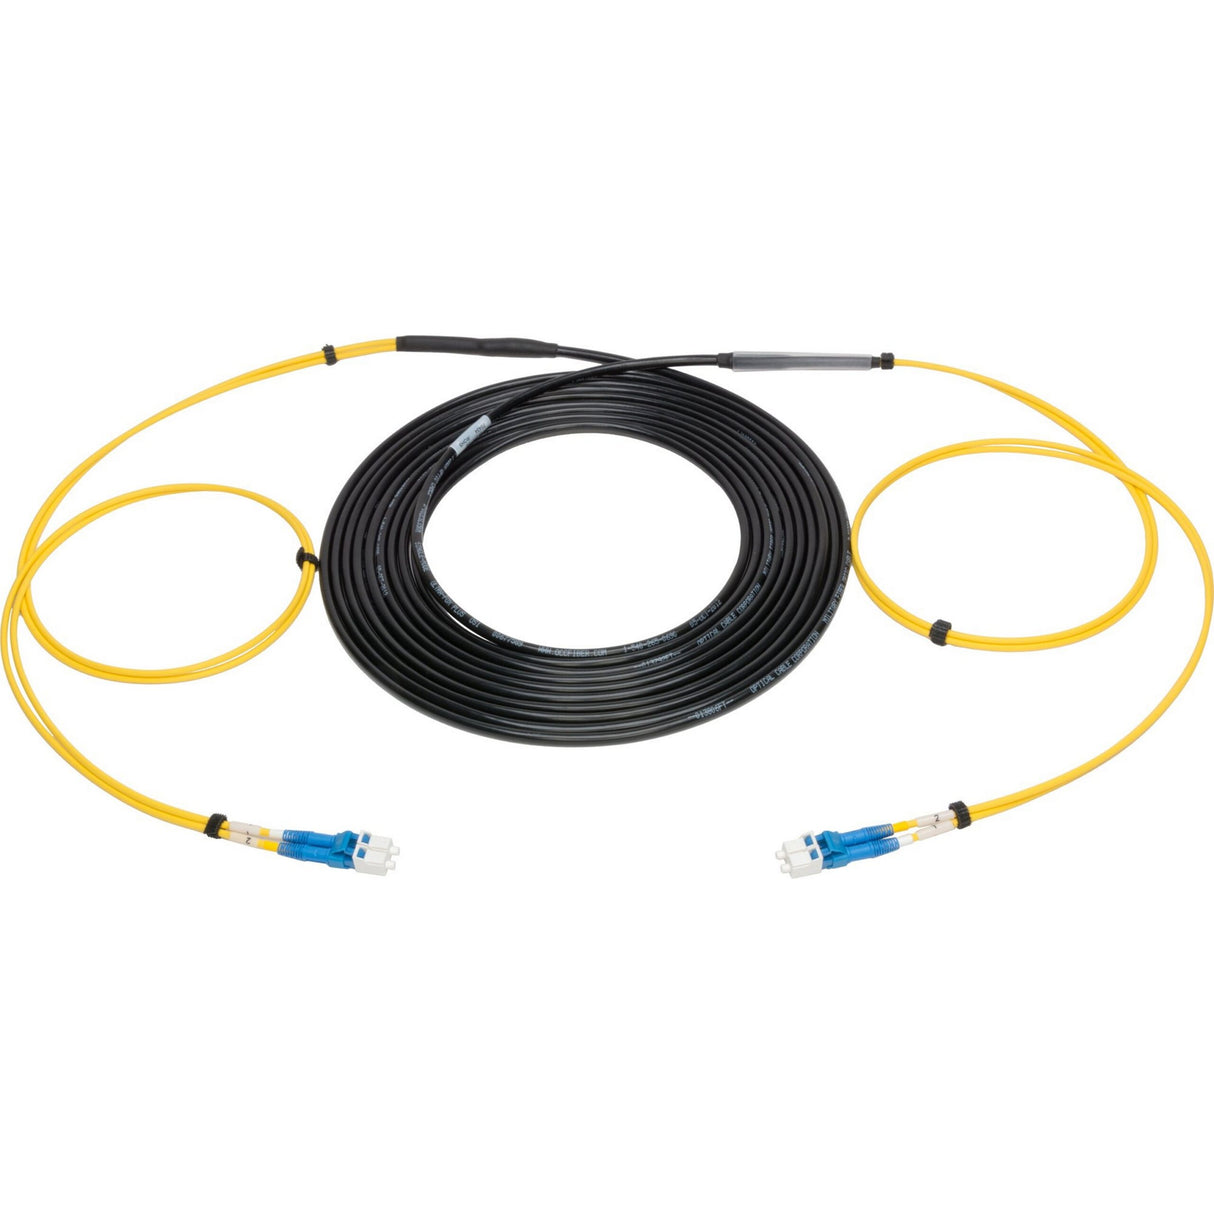 Camplex 2-Channel LC-Single Mode Tactical Fiber Optical Snake, 250 Foot